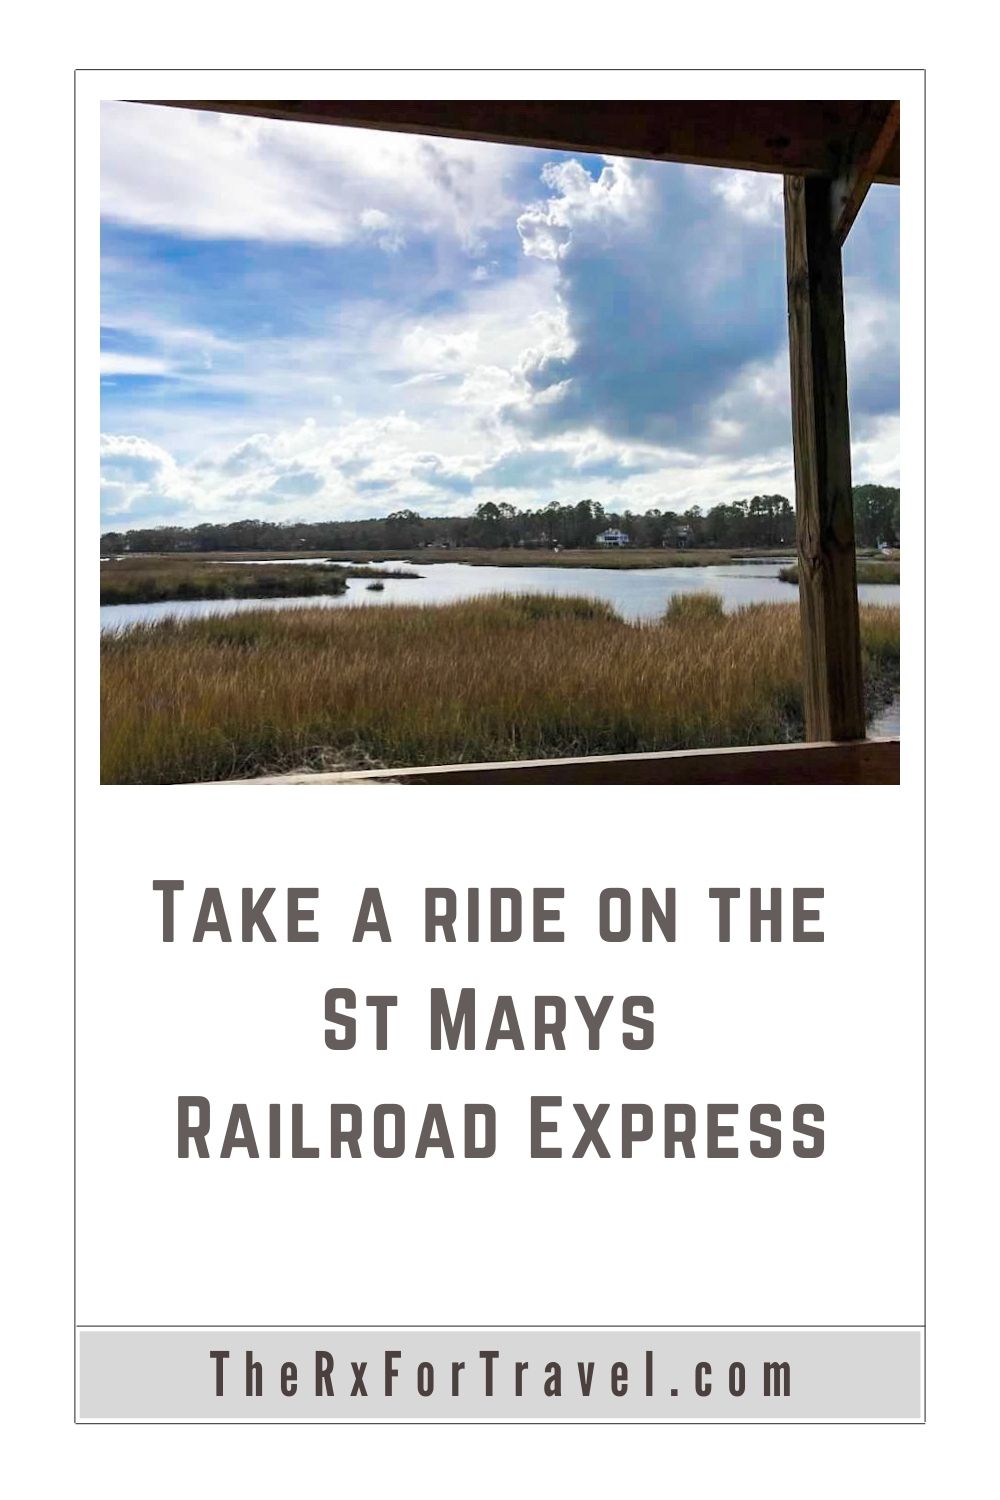 Take a ride on the St Marys Railroad Express on the Railway Georgia to see the scenic St Marys River